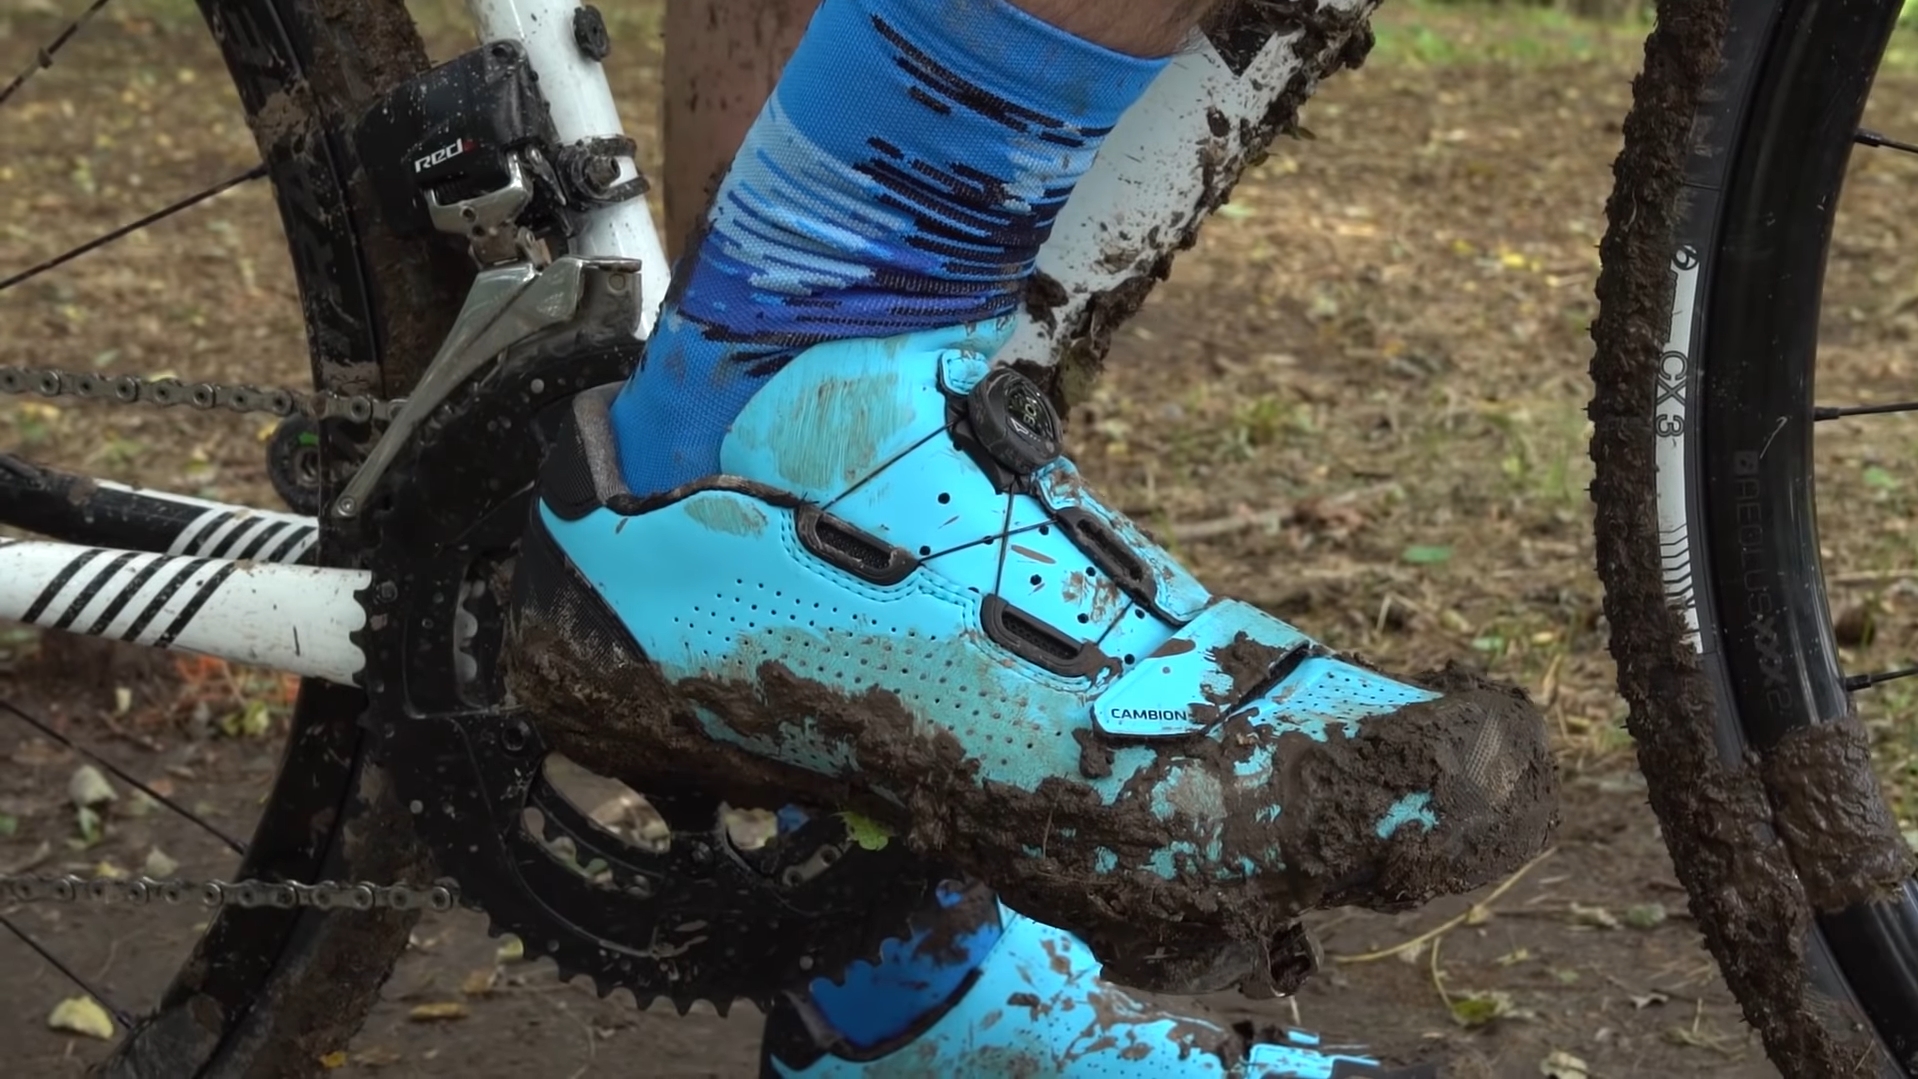 Muddy cycling shoes